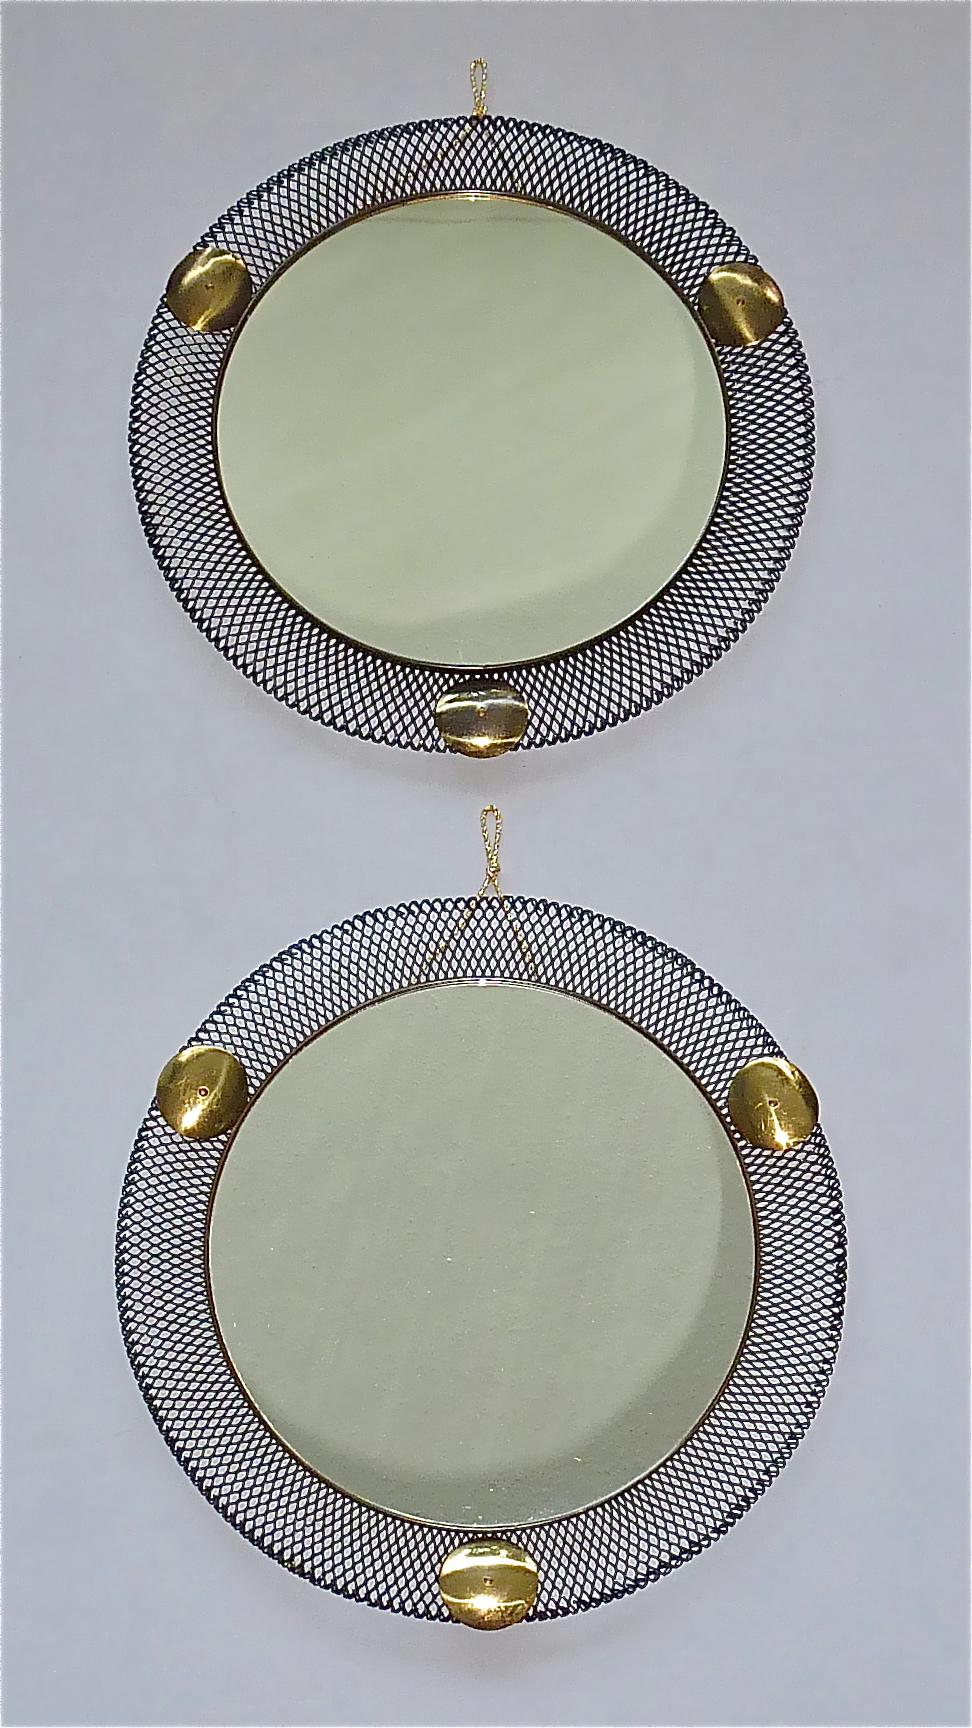 Pair Round Midcentury Wall Mirrors Brass Black Stretched Metal 1955 Mategot Biny For Sale 8